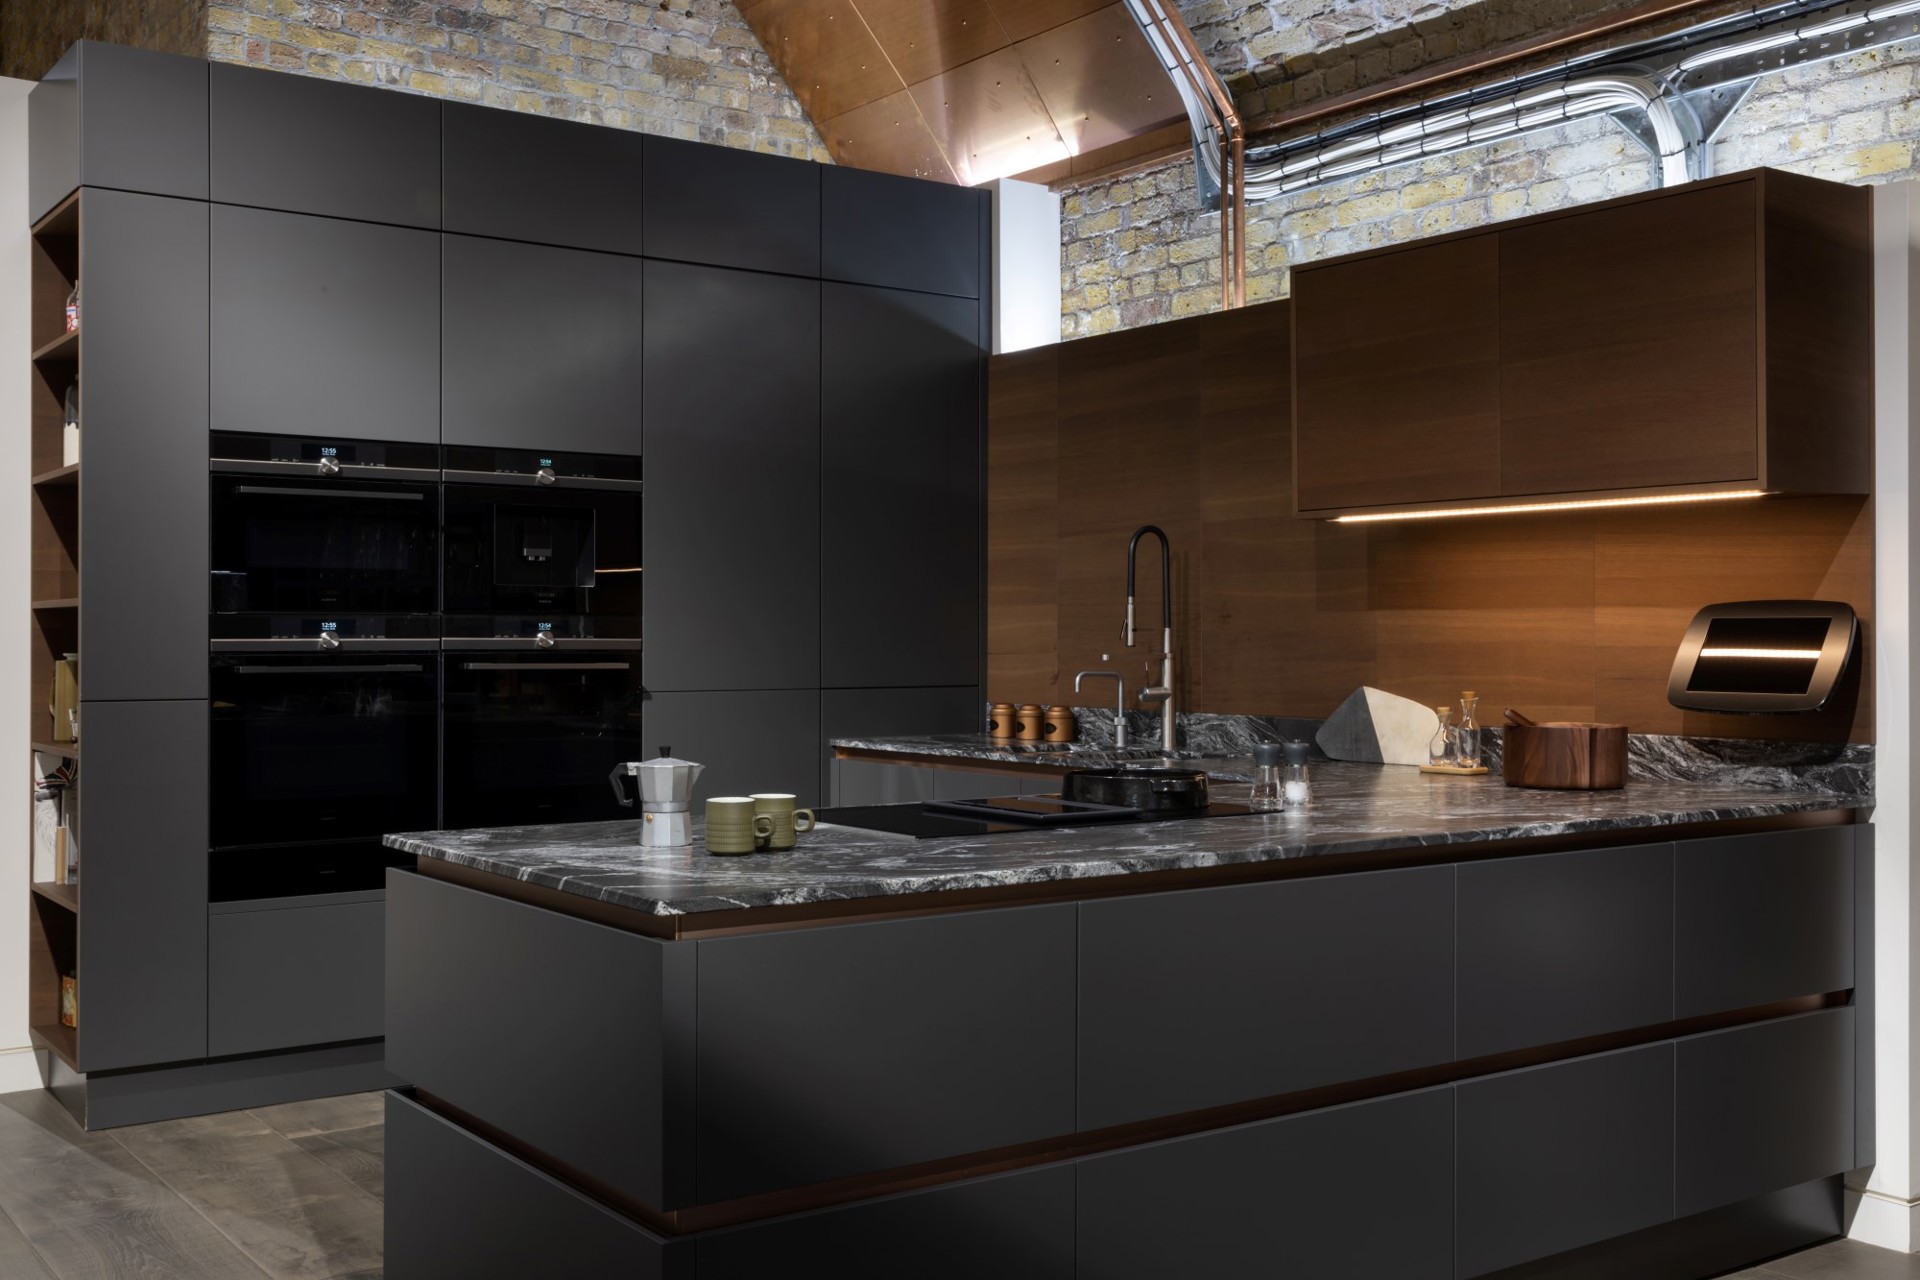 EXPERIENCE LONDON’S MOST INTERACTIVE LUXURY KITCHEN SHOWROOM